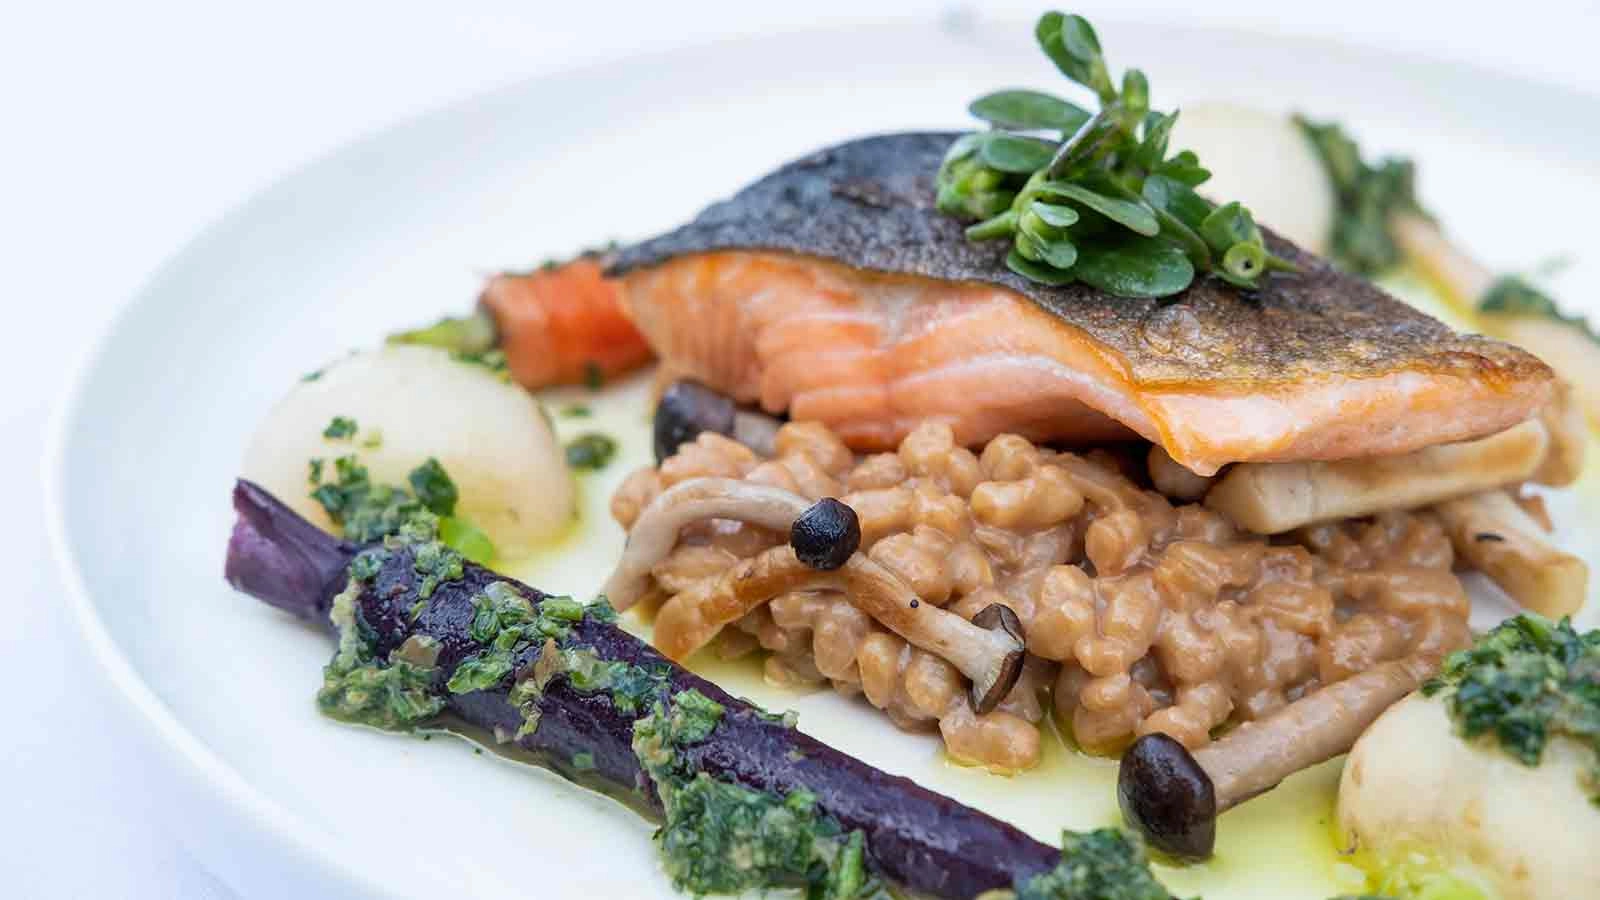 Olive Oil Poached Arctic Char with farro risotto, mushrooms, purslane, salsa verde, served at Gatehouse Restaurant at the CIA at Greystone in the Napa Valley.